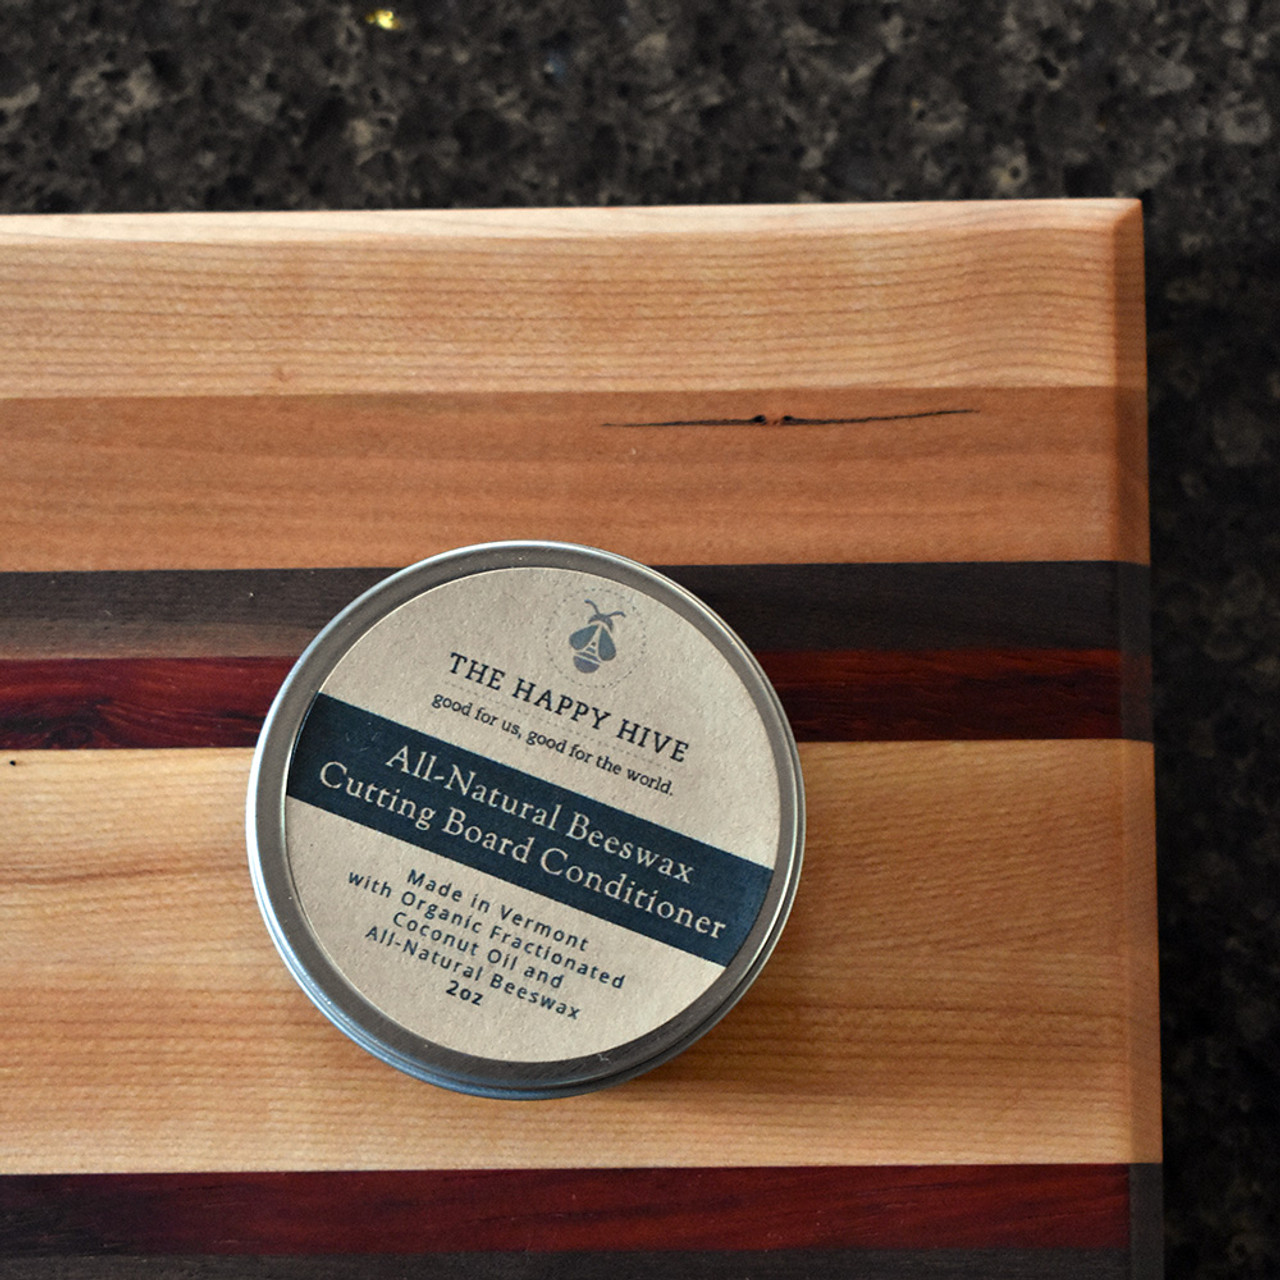 Cutting Board Conditioner - Horsford Gardens and Nursery